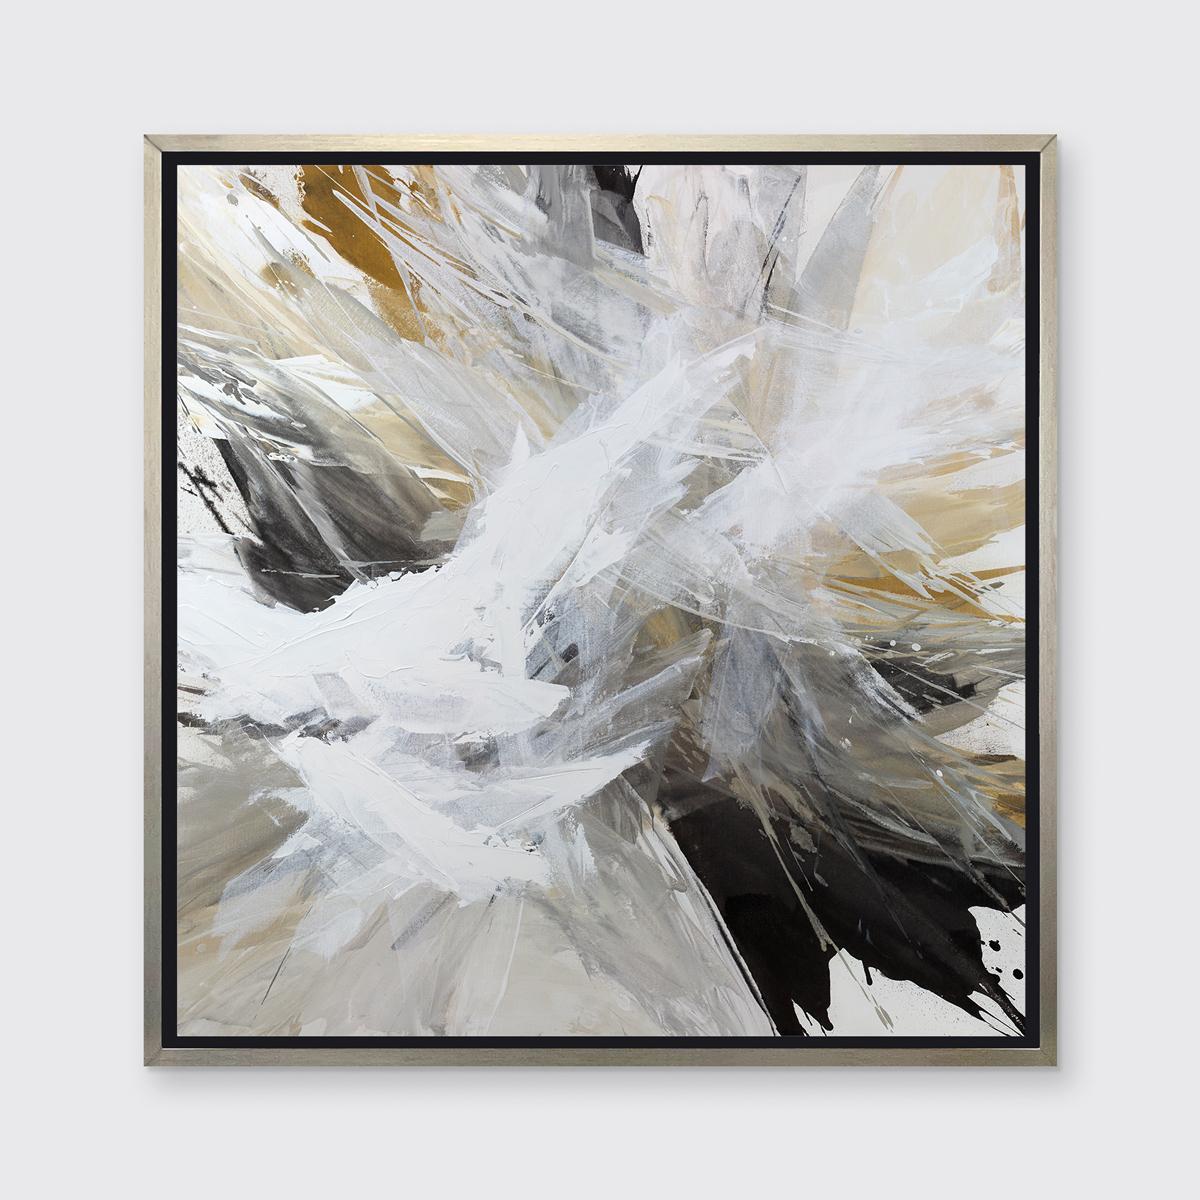 Teodora Guererra Abstract Print - "Today I Choose Palette Knives, " Framed Limited Edition Giclee Print, 30" x 30"